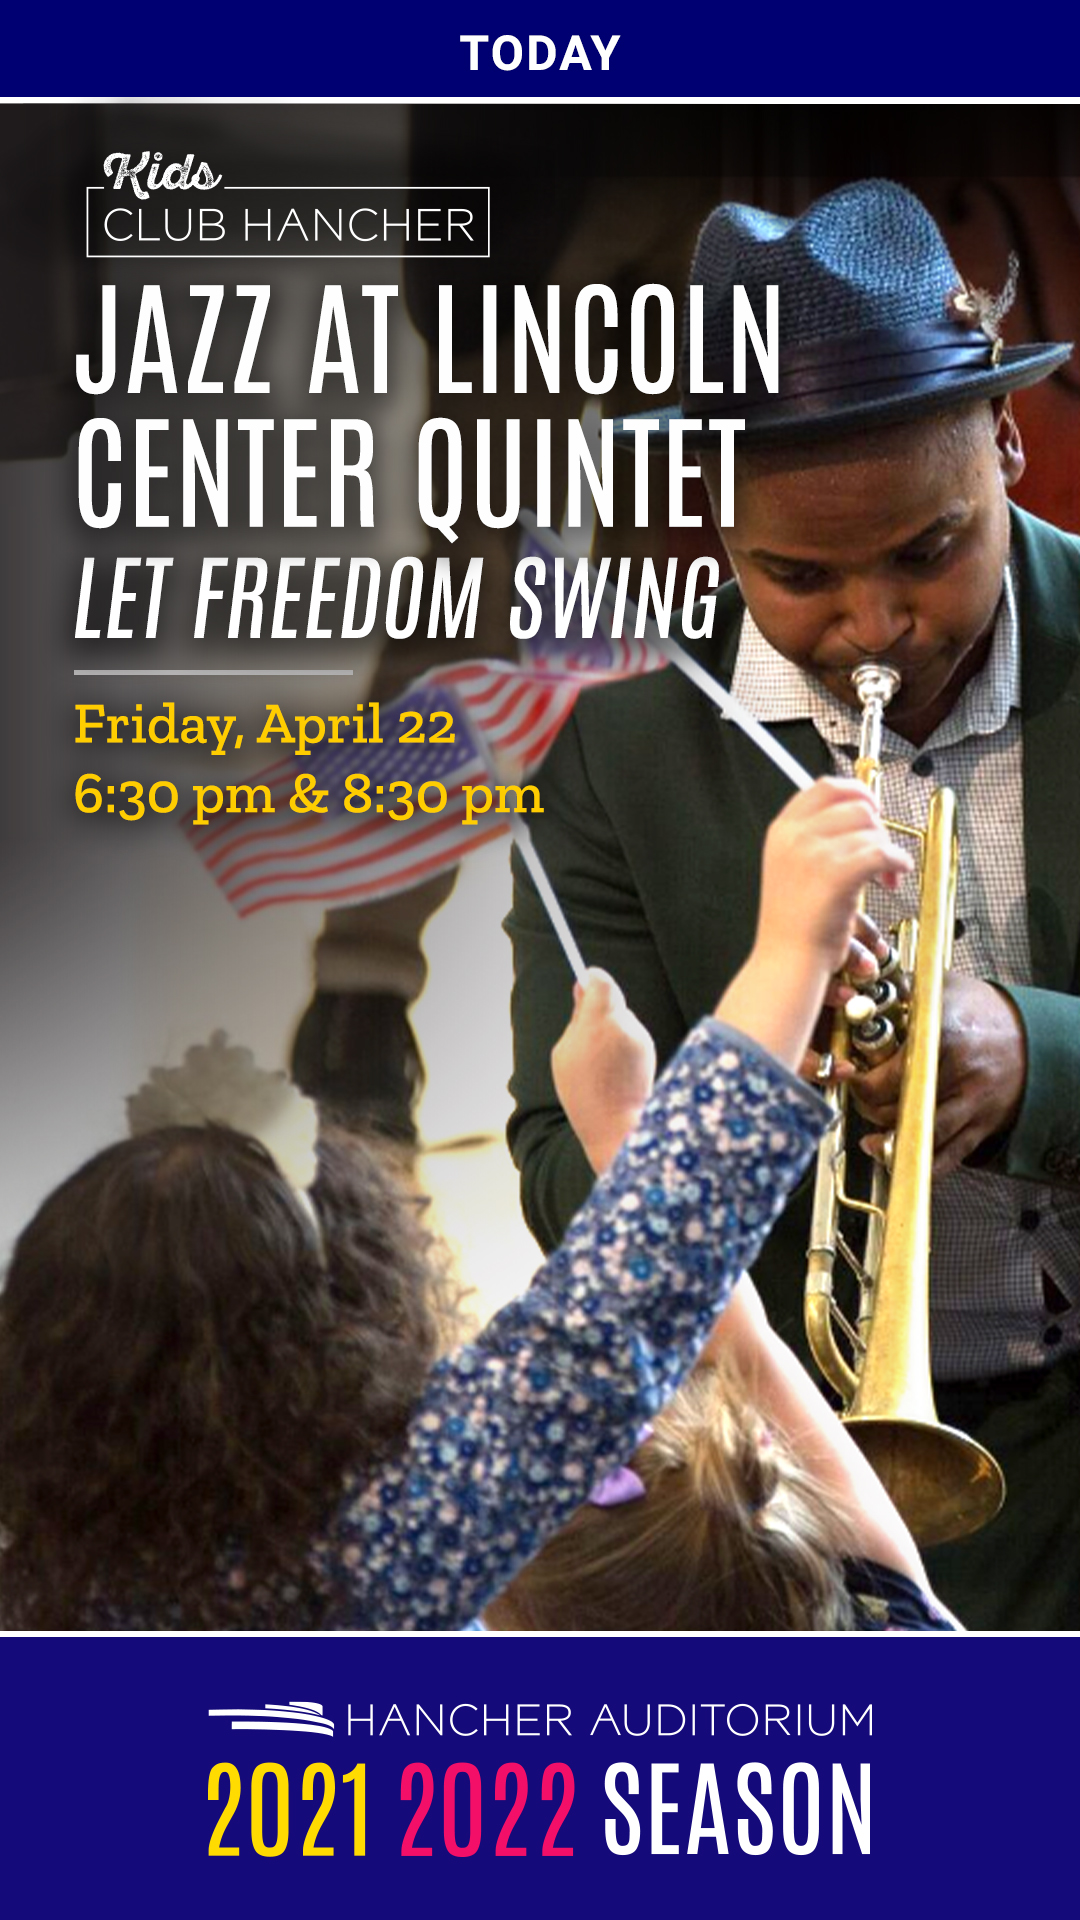 Kids Club Hancher: Jazz at Lincoln Center Quintet, "Let Freedom Swing"- Today